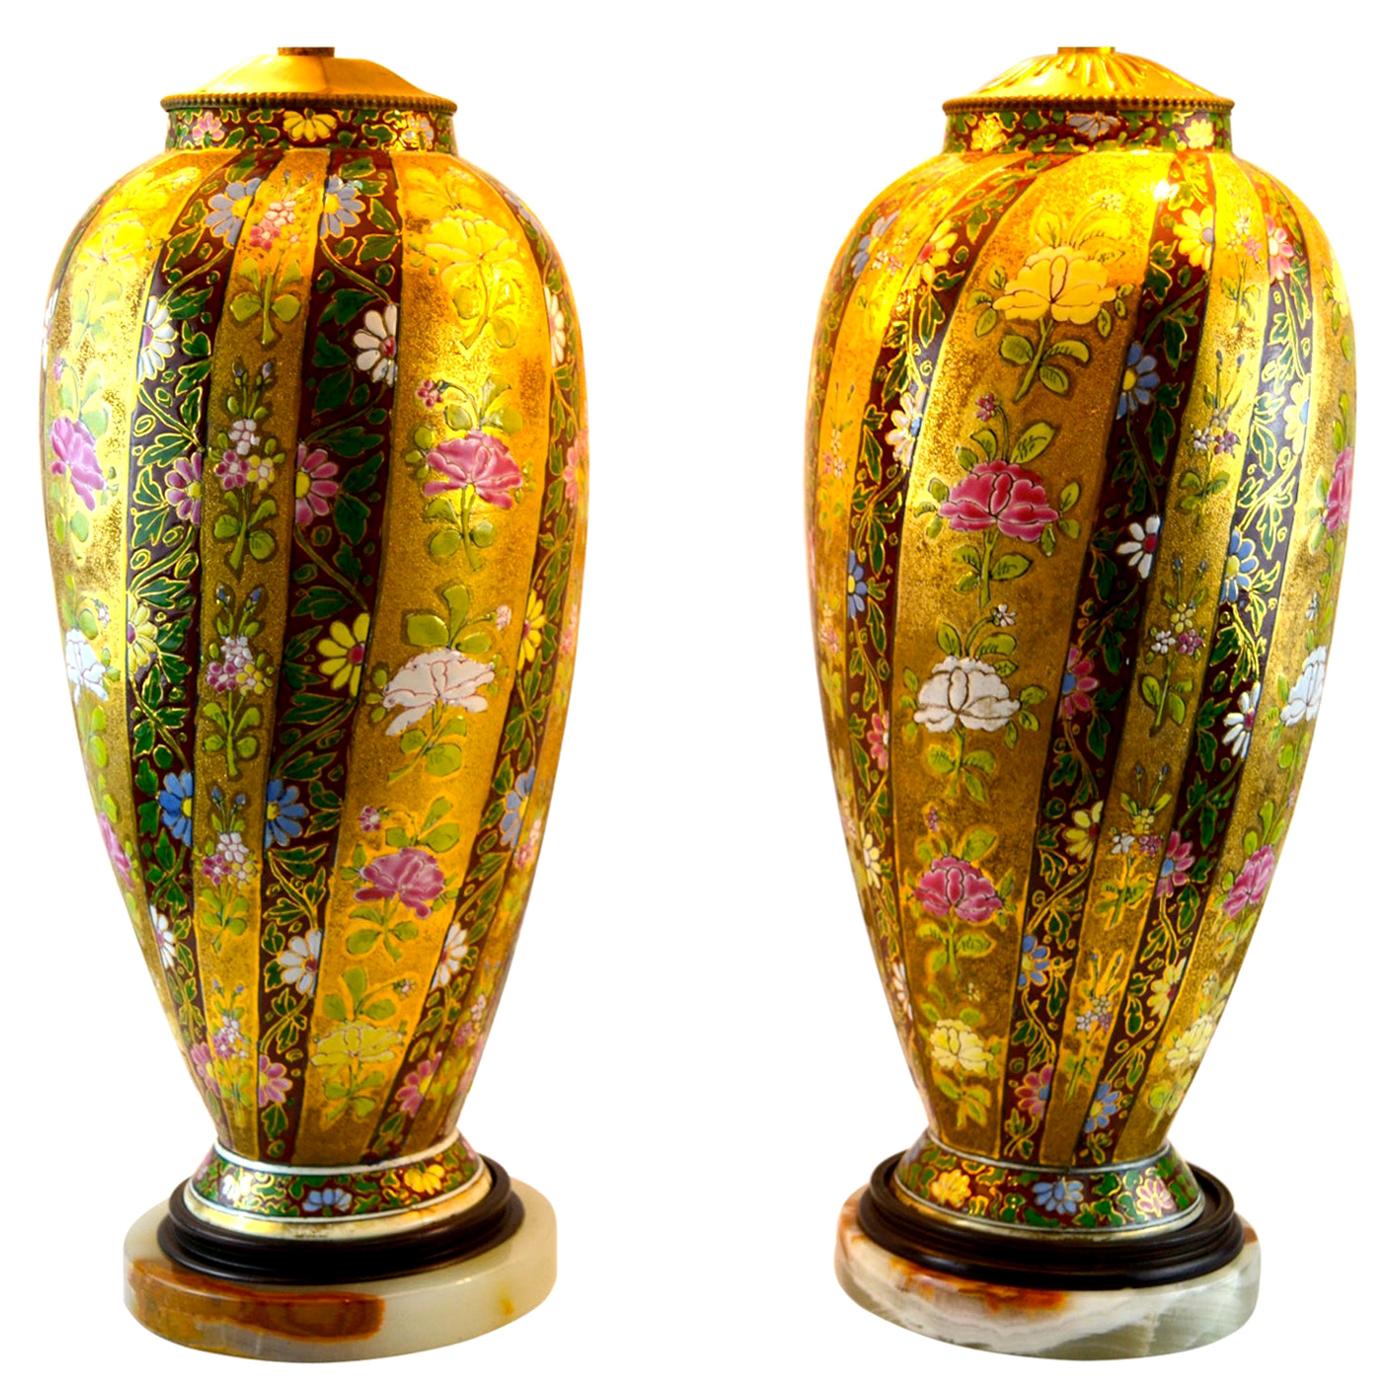 A pair of Art Nouveau porcelain vases by the Fischer Hungarian Porcelain Factory from Budapest Hungary that have been turned into lamps. The vases feature a stripe design of various colors painted with brightly colored enamel flowers on a matte gold